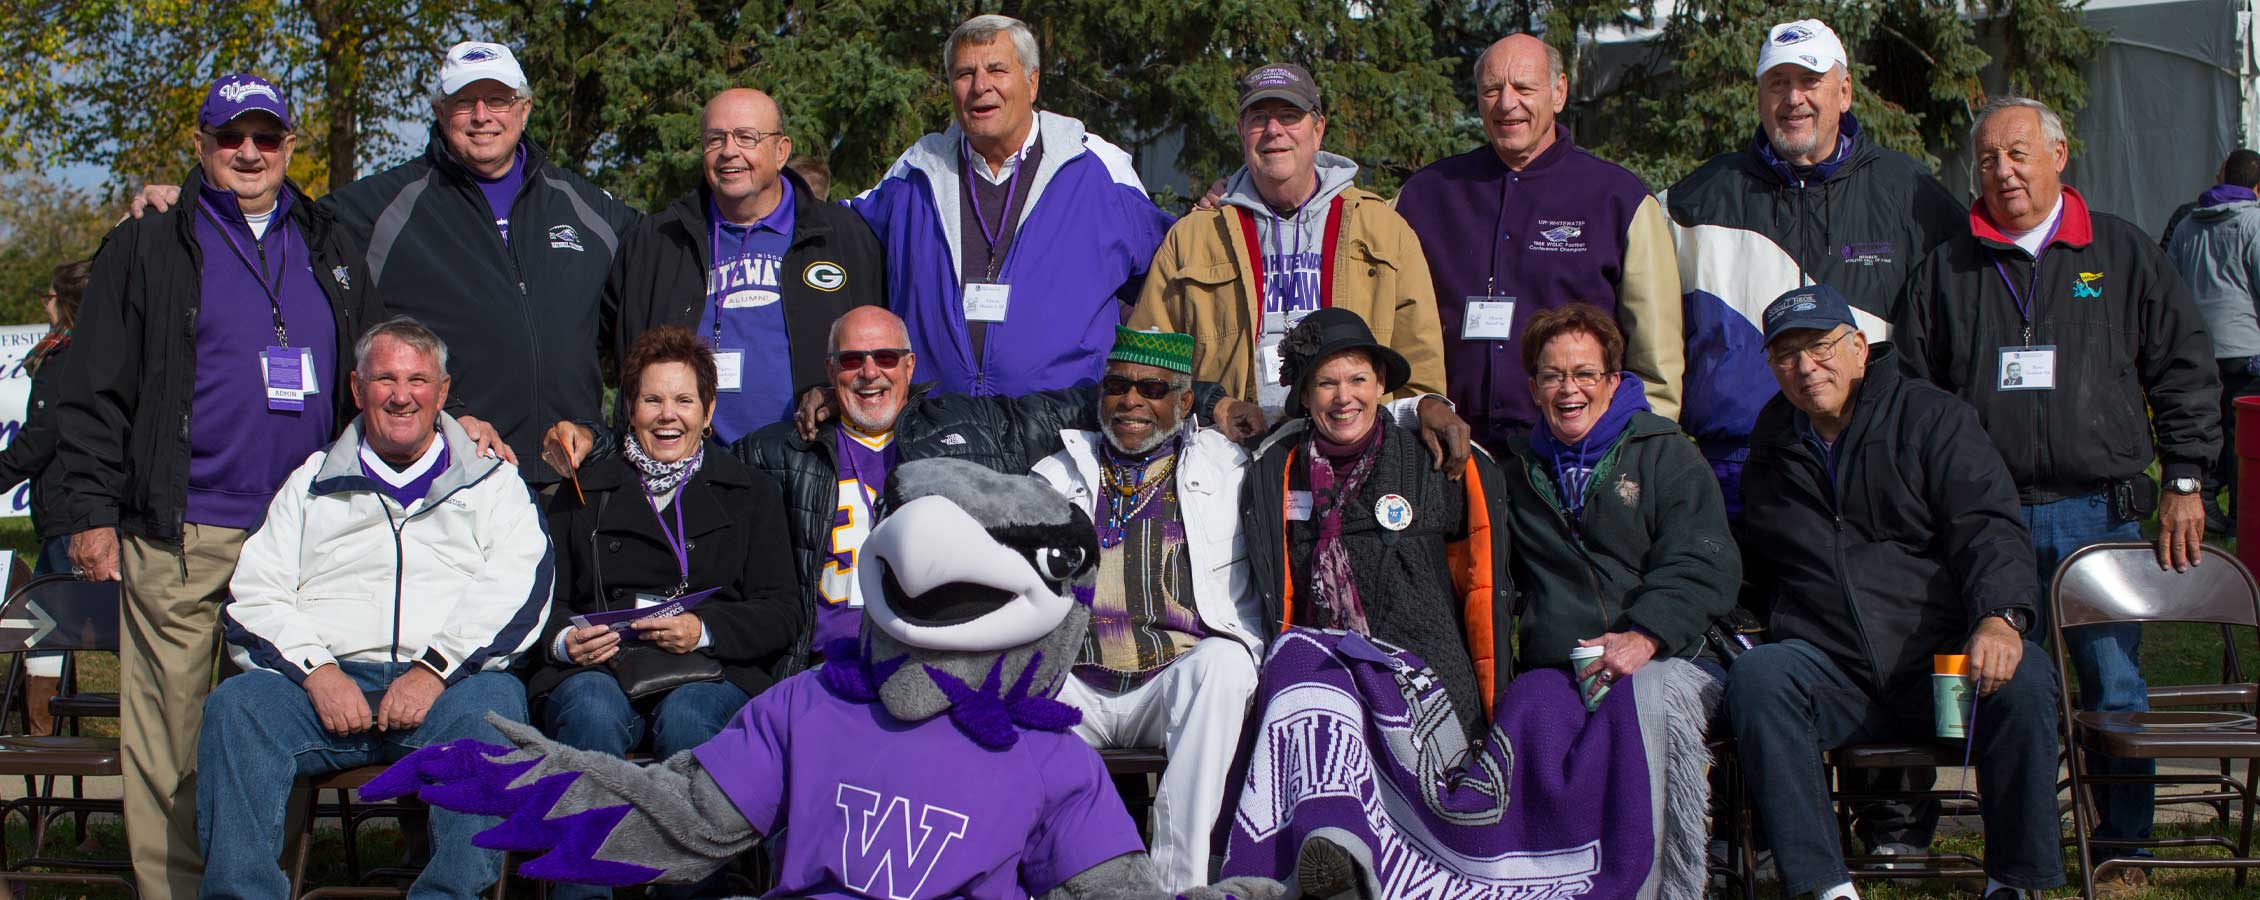 Homecoming Alumni sit with Willie Warhawk.